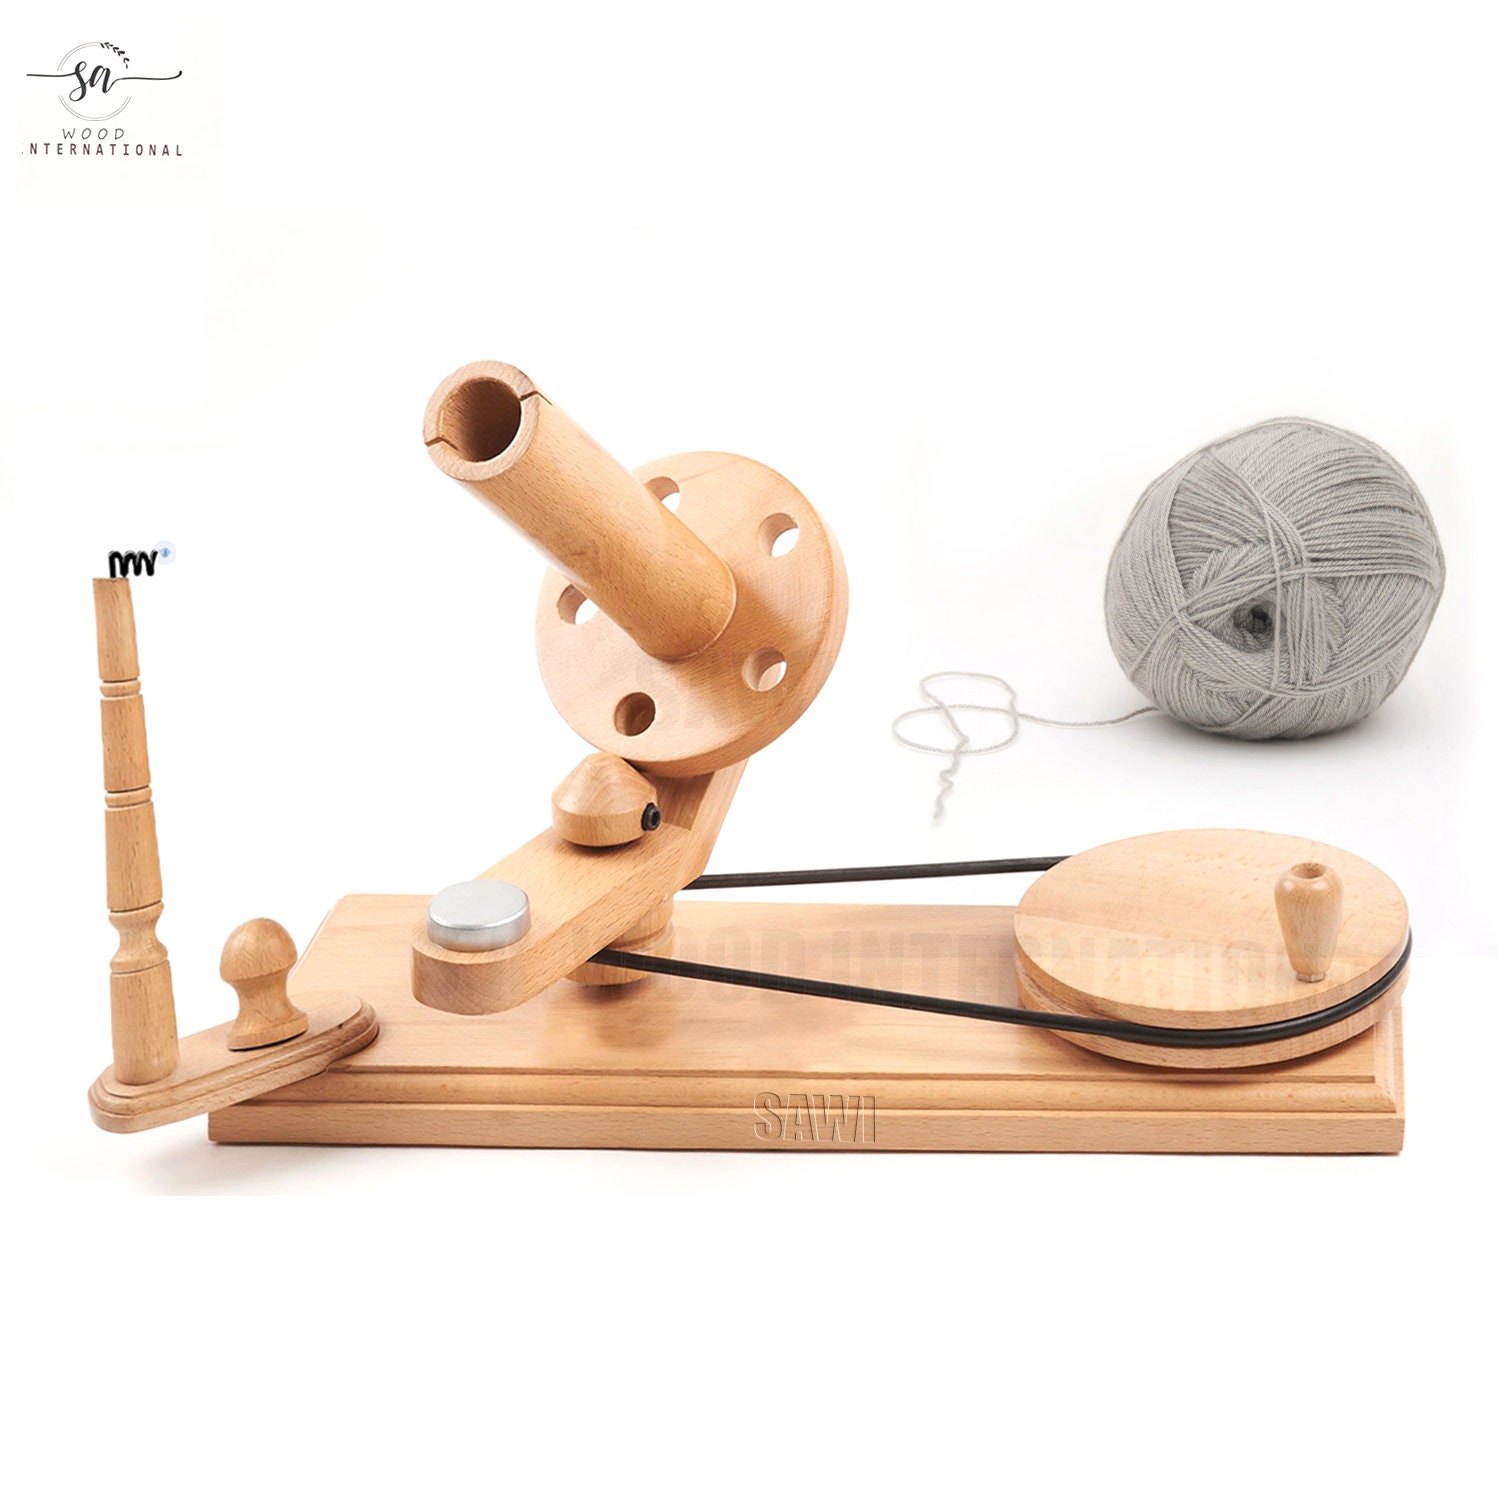 BLUE DUTCH Wooden Yarn Winder for Knitting and Crocheting Standard